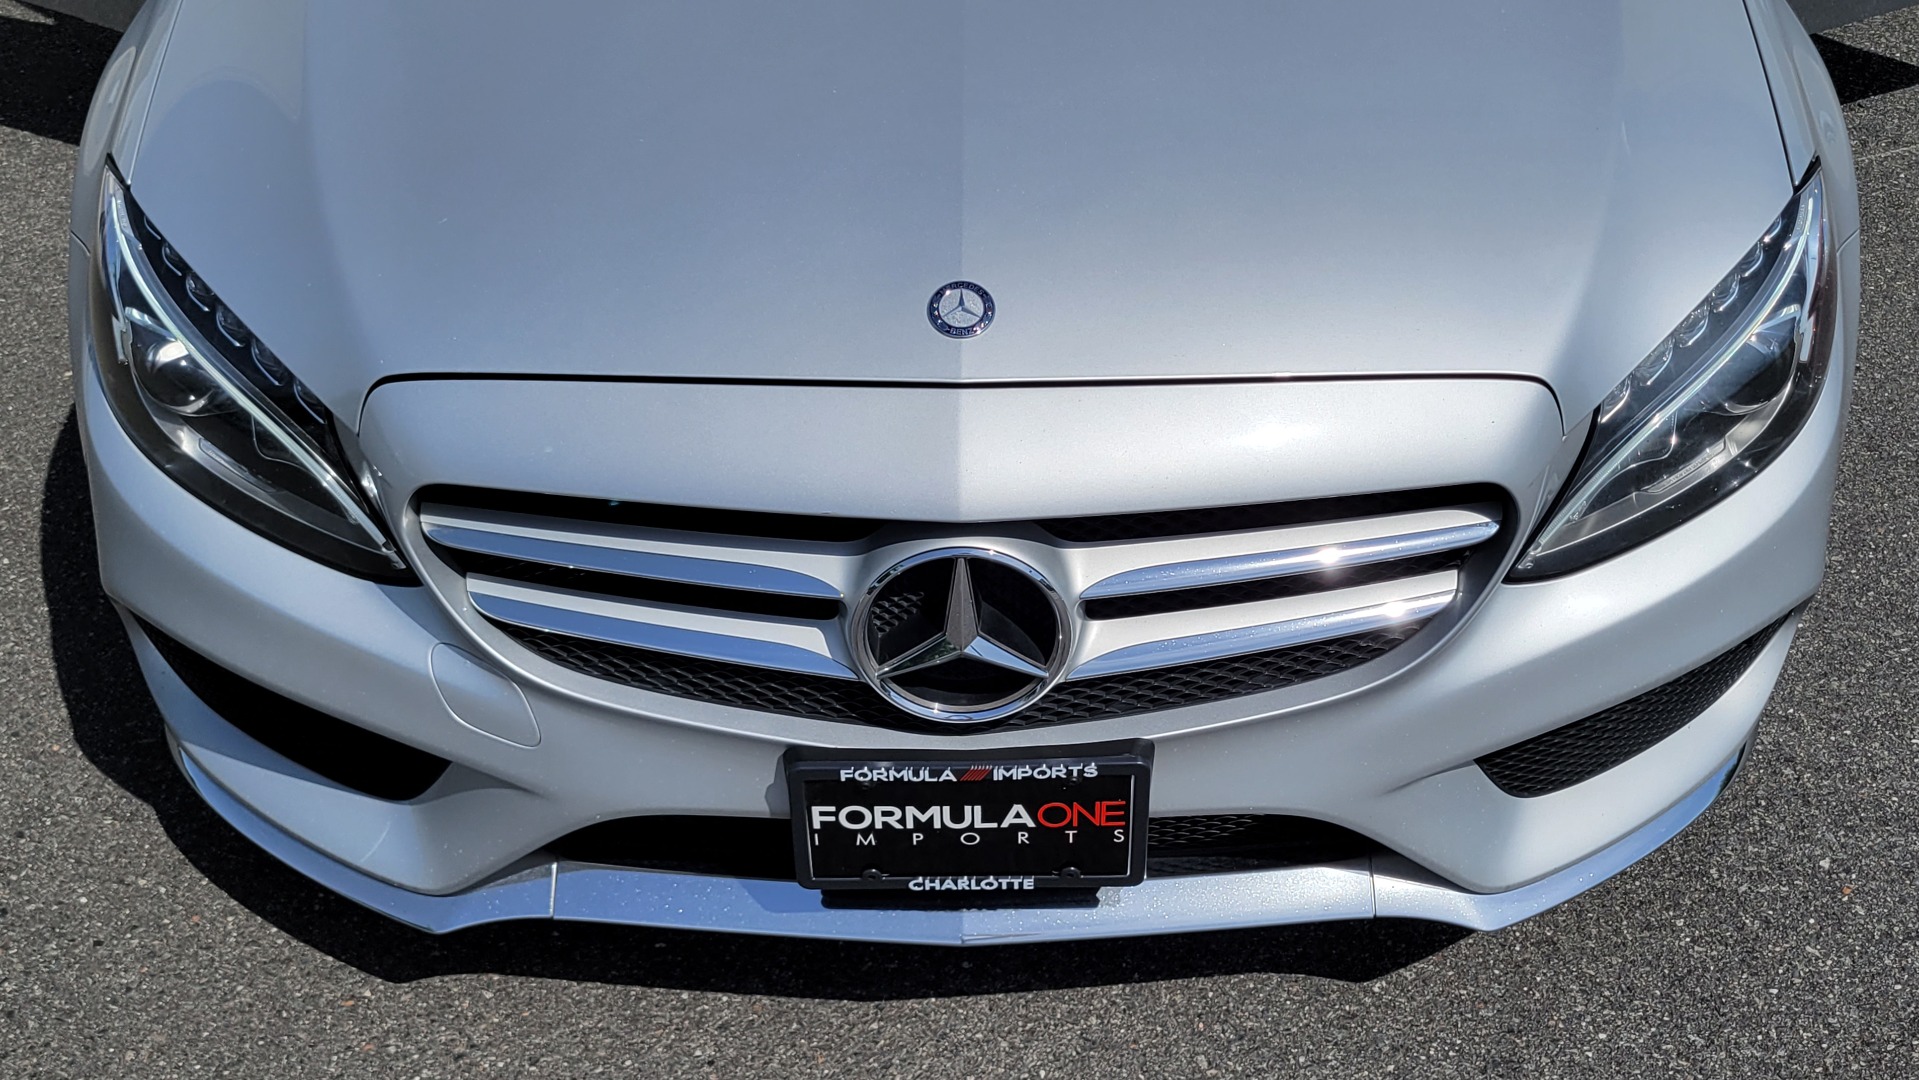 Used 2016 Mercedes-Benz C-CLASS C 300 PREMIUM 2 / SPORT / PANO-ROOF / BSA / HTD STS / MULTIMEDIA for sale Sold at Formula Imports in Charlotte NC 28227 27